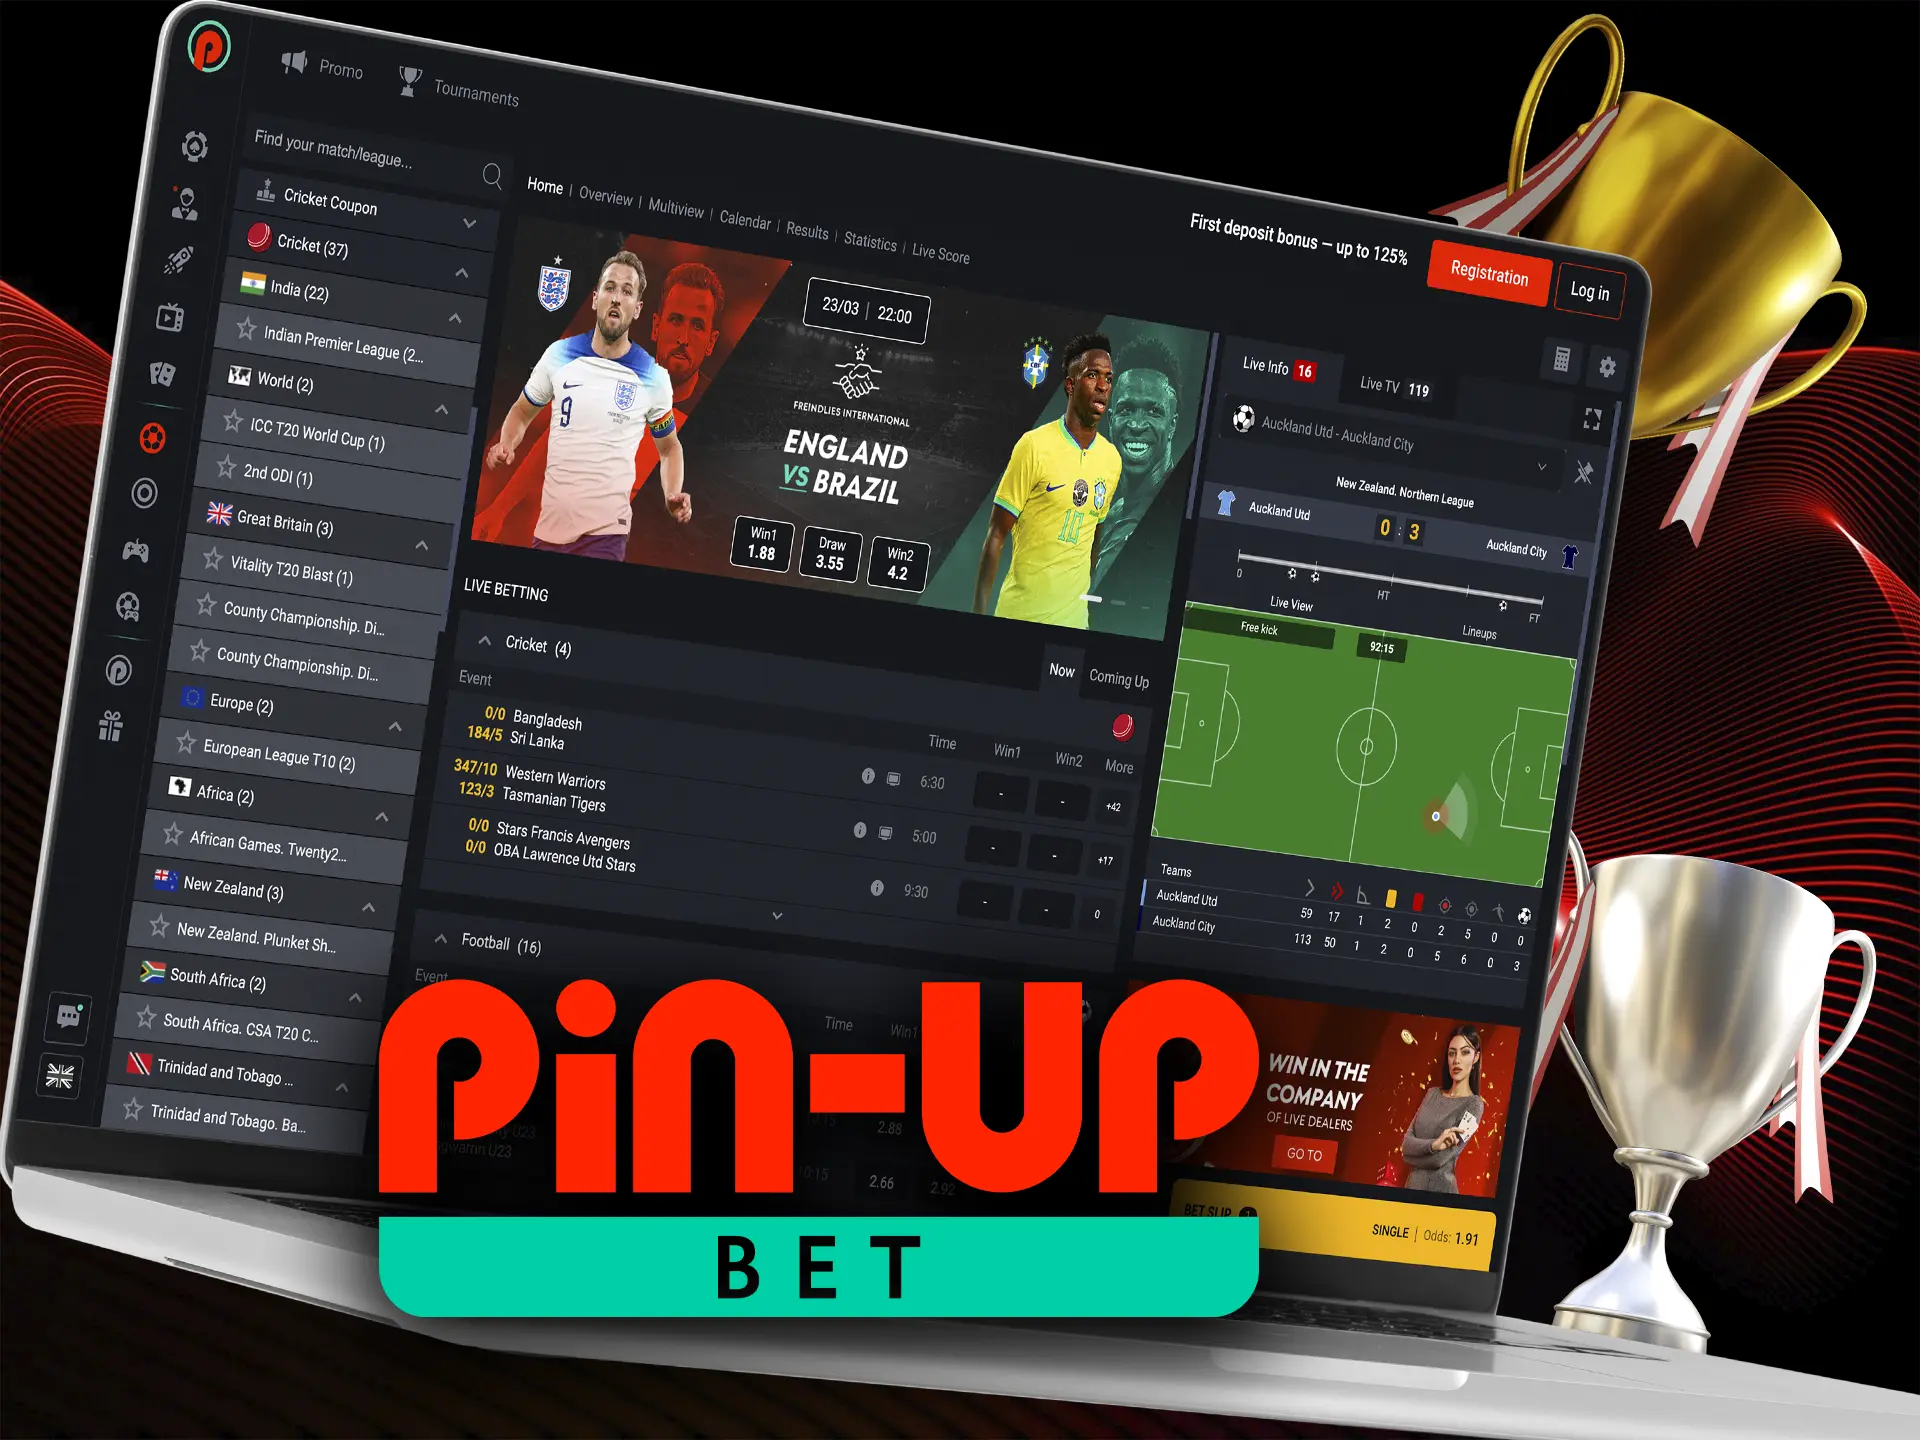 Use your knowledge and skills intelligently when betting on the most famous cricket tournaments at Pin Up.